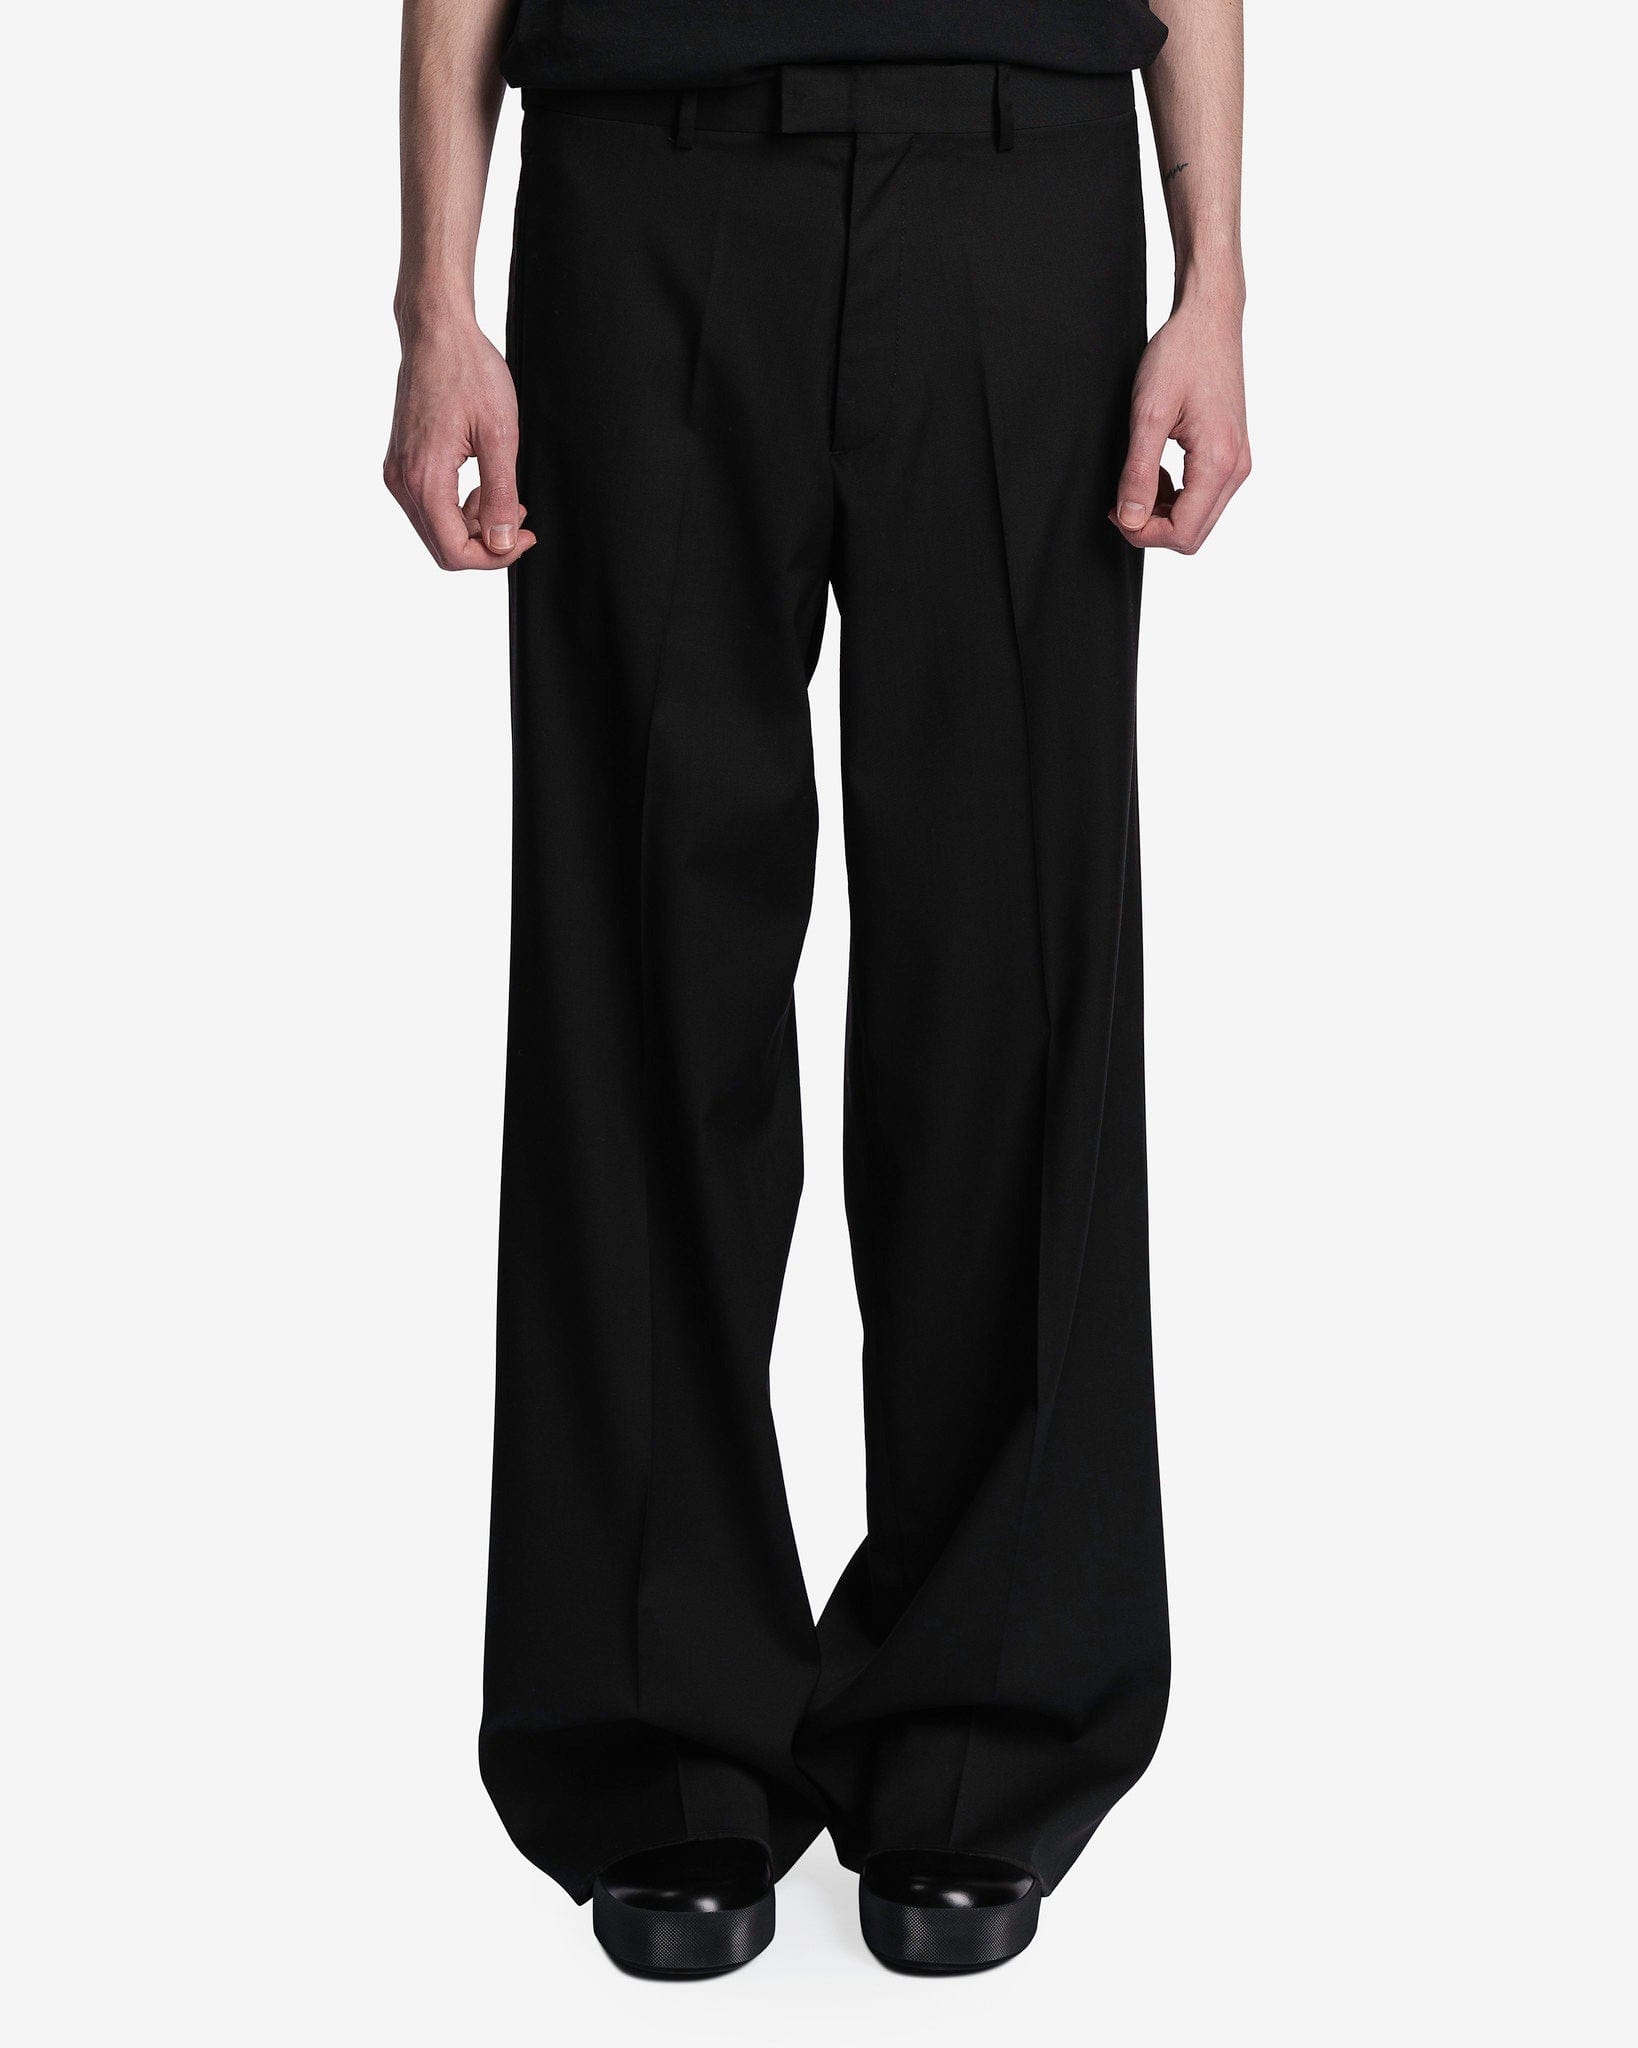 Classic straight pants with 2 Back Pockets in Black